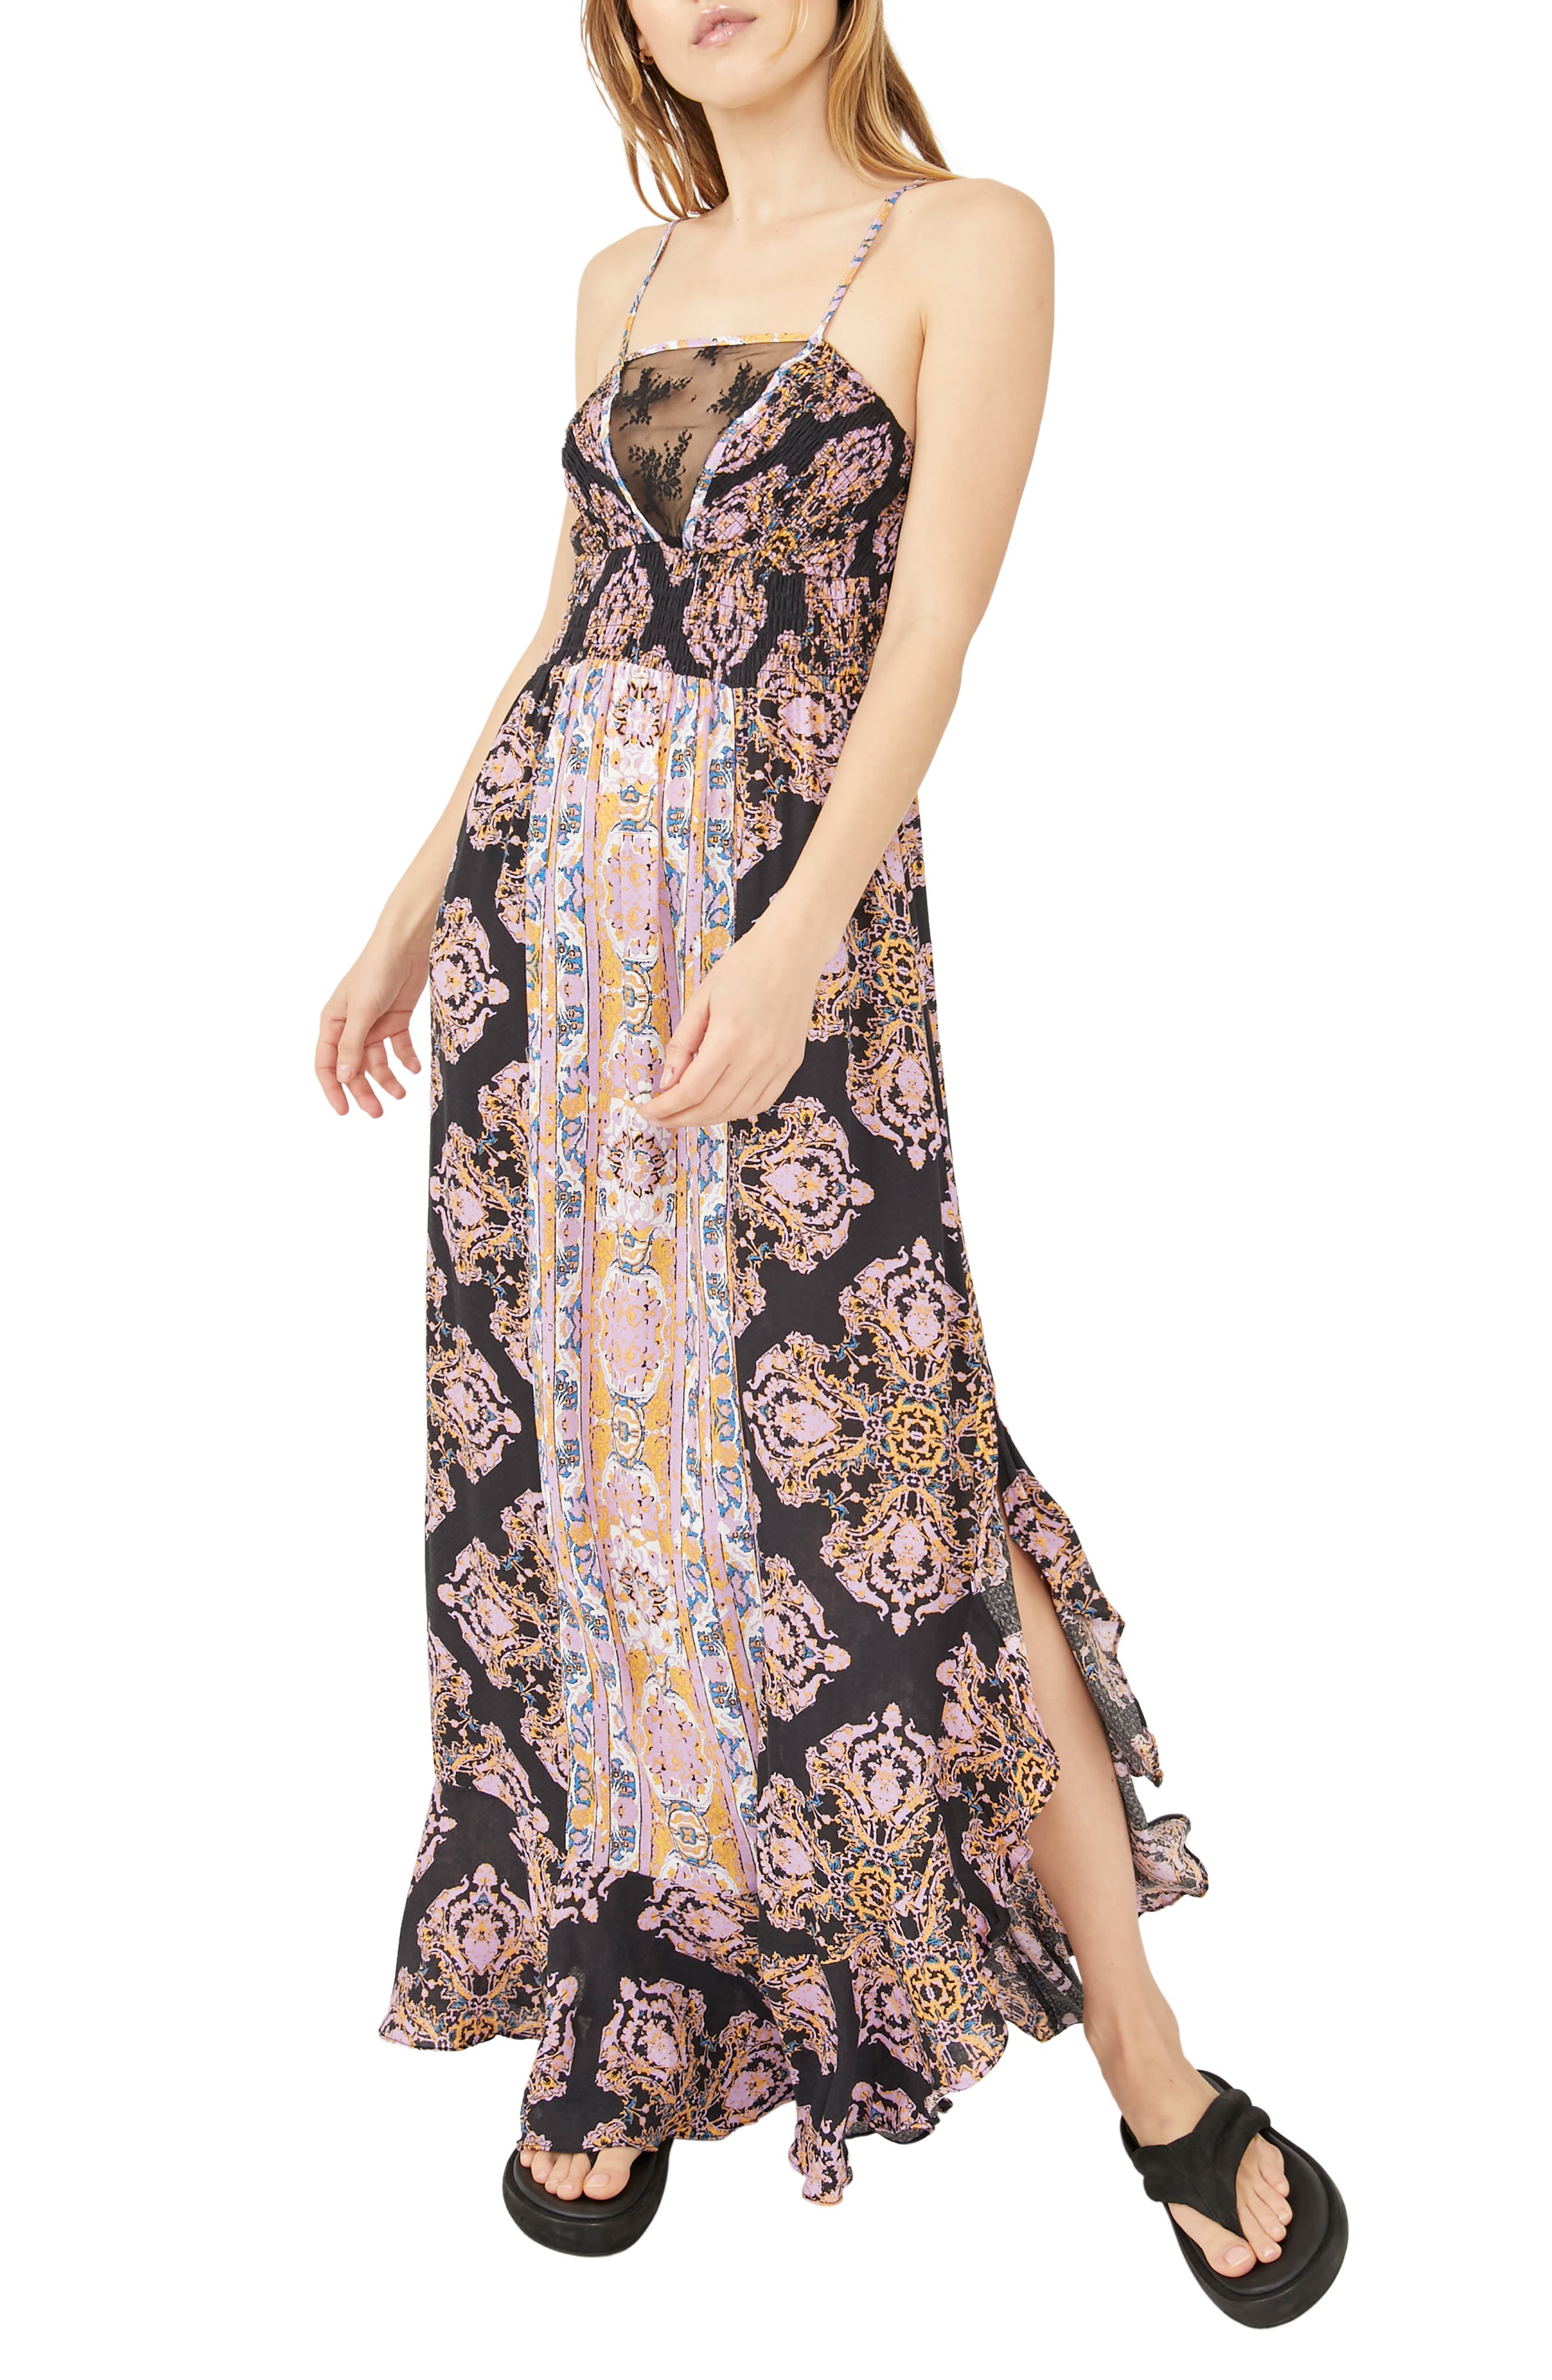 FREE PEOPLE Dresses for Women | ModeSens